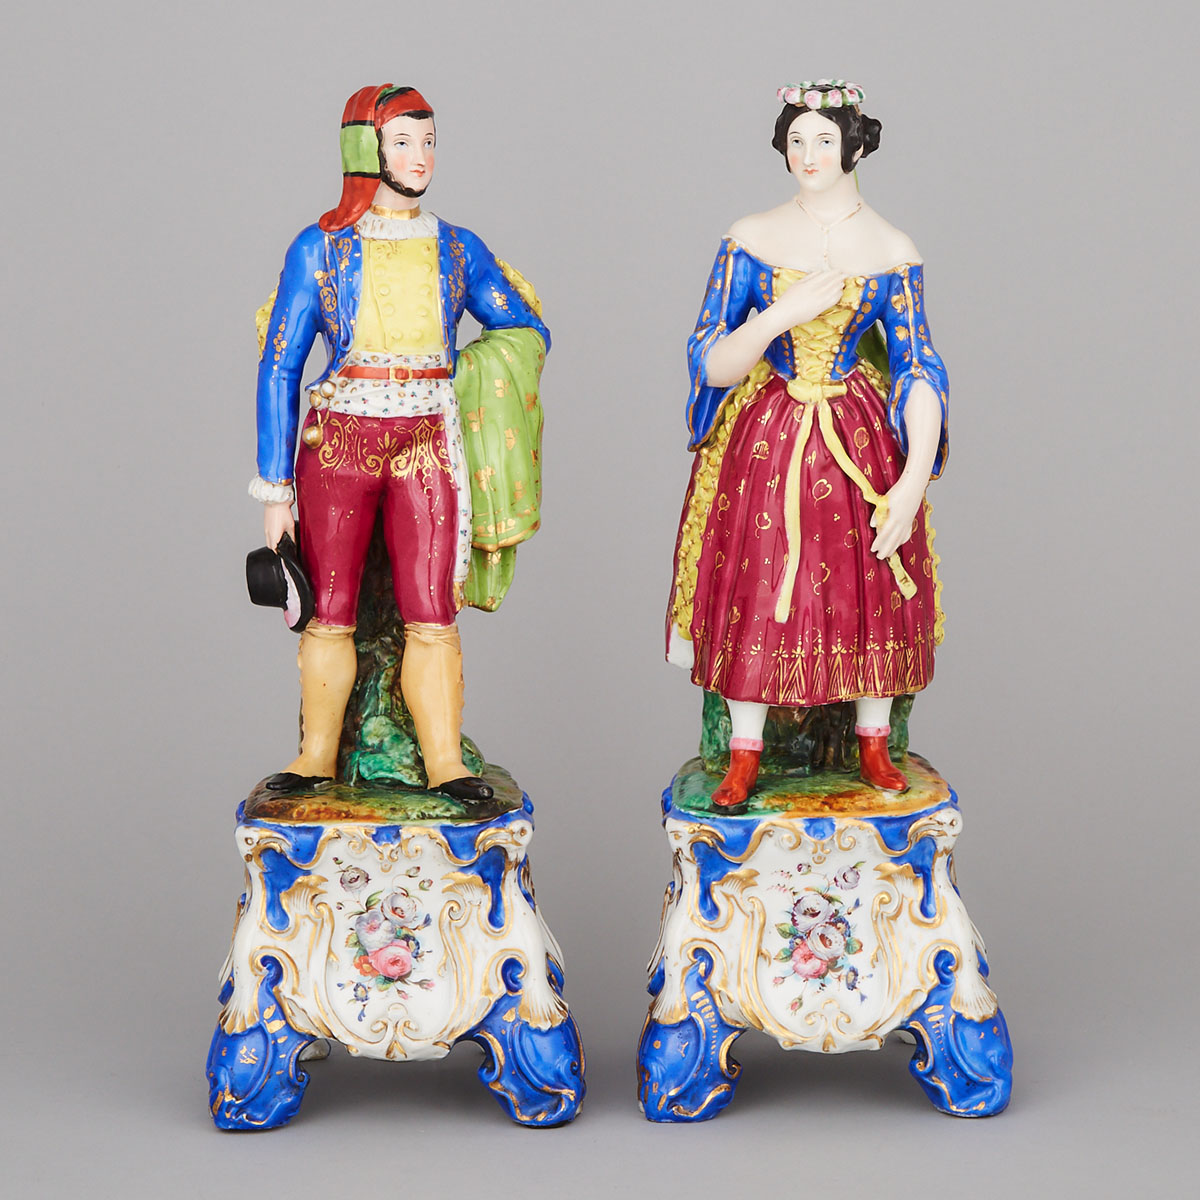 Pair of French Porcelain Figures, mid-19th century